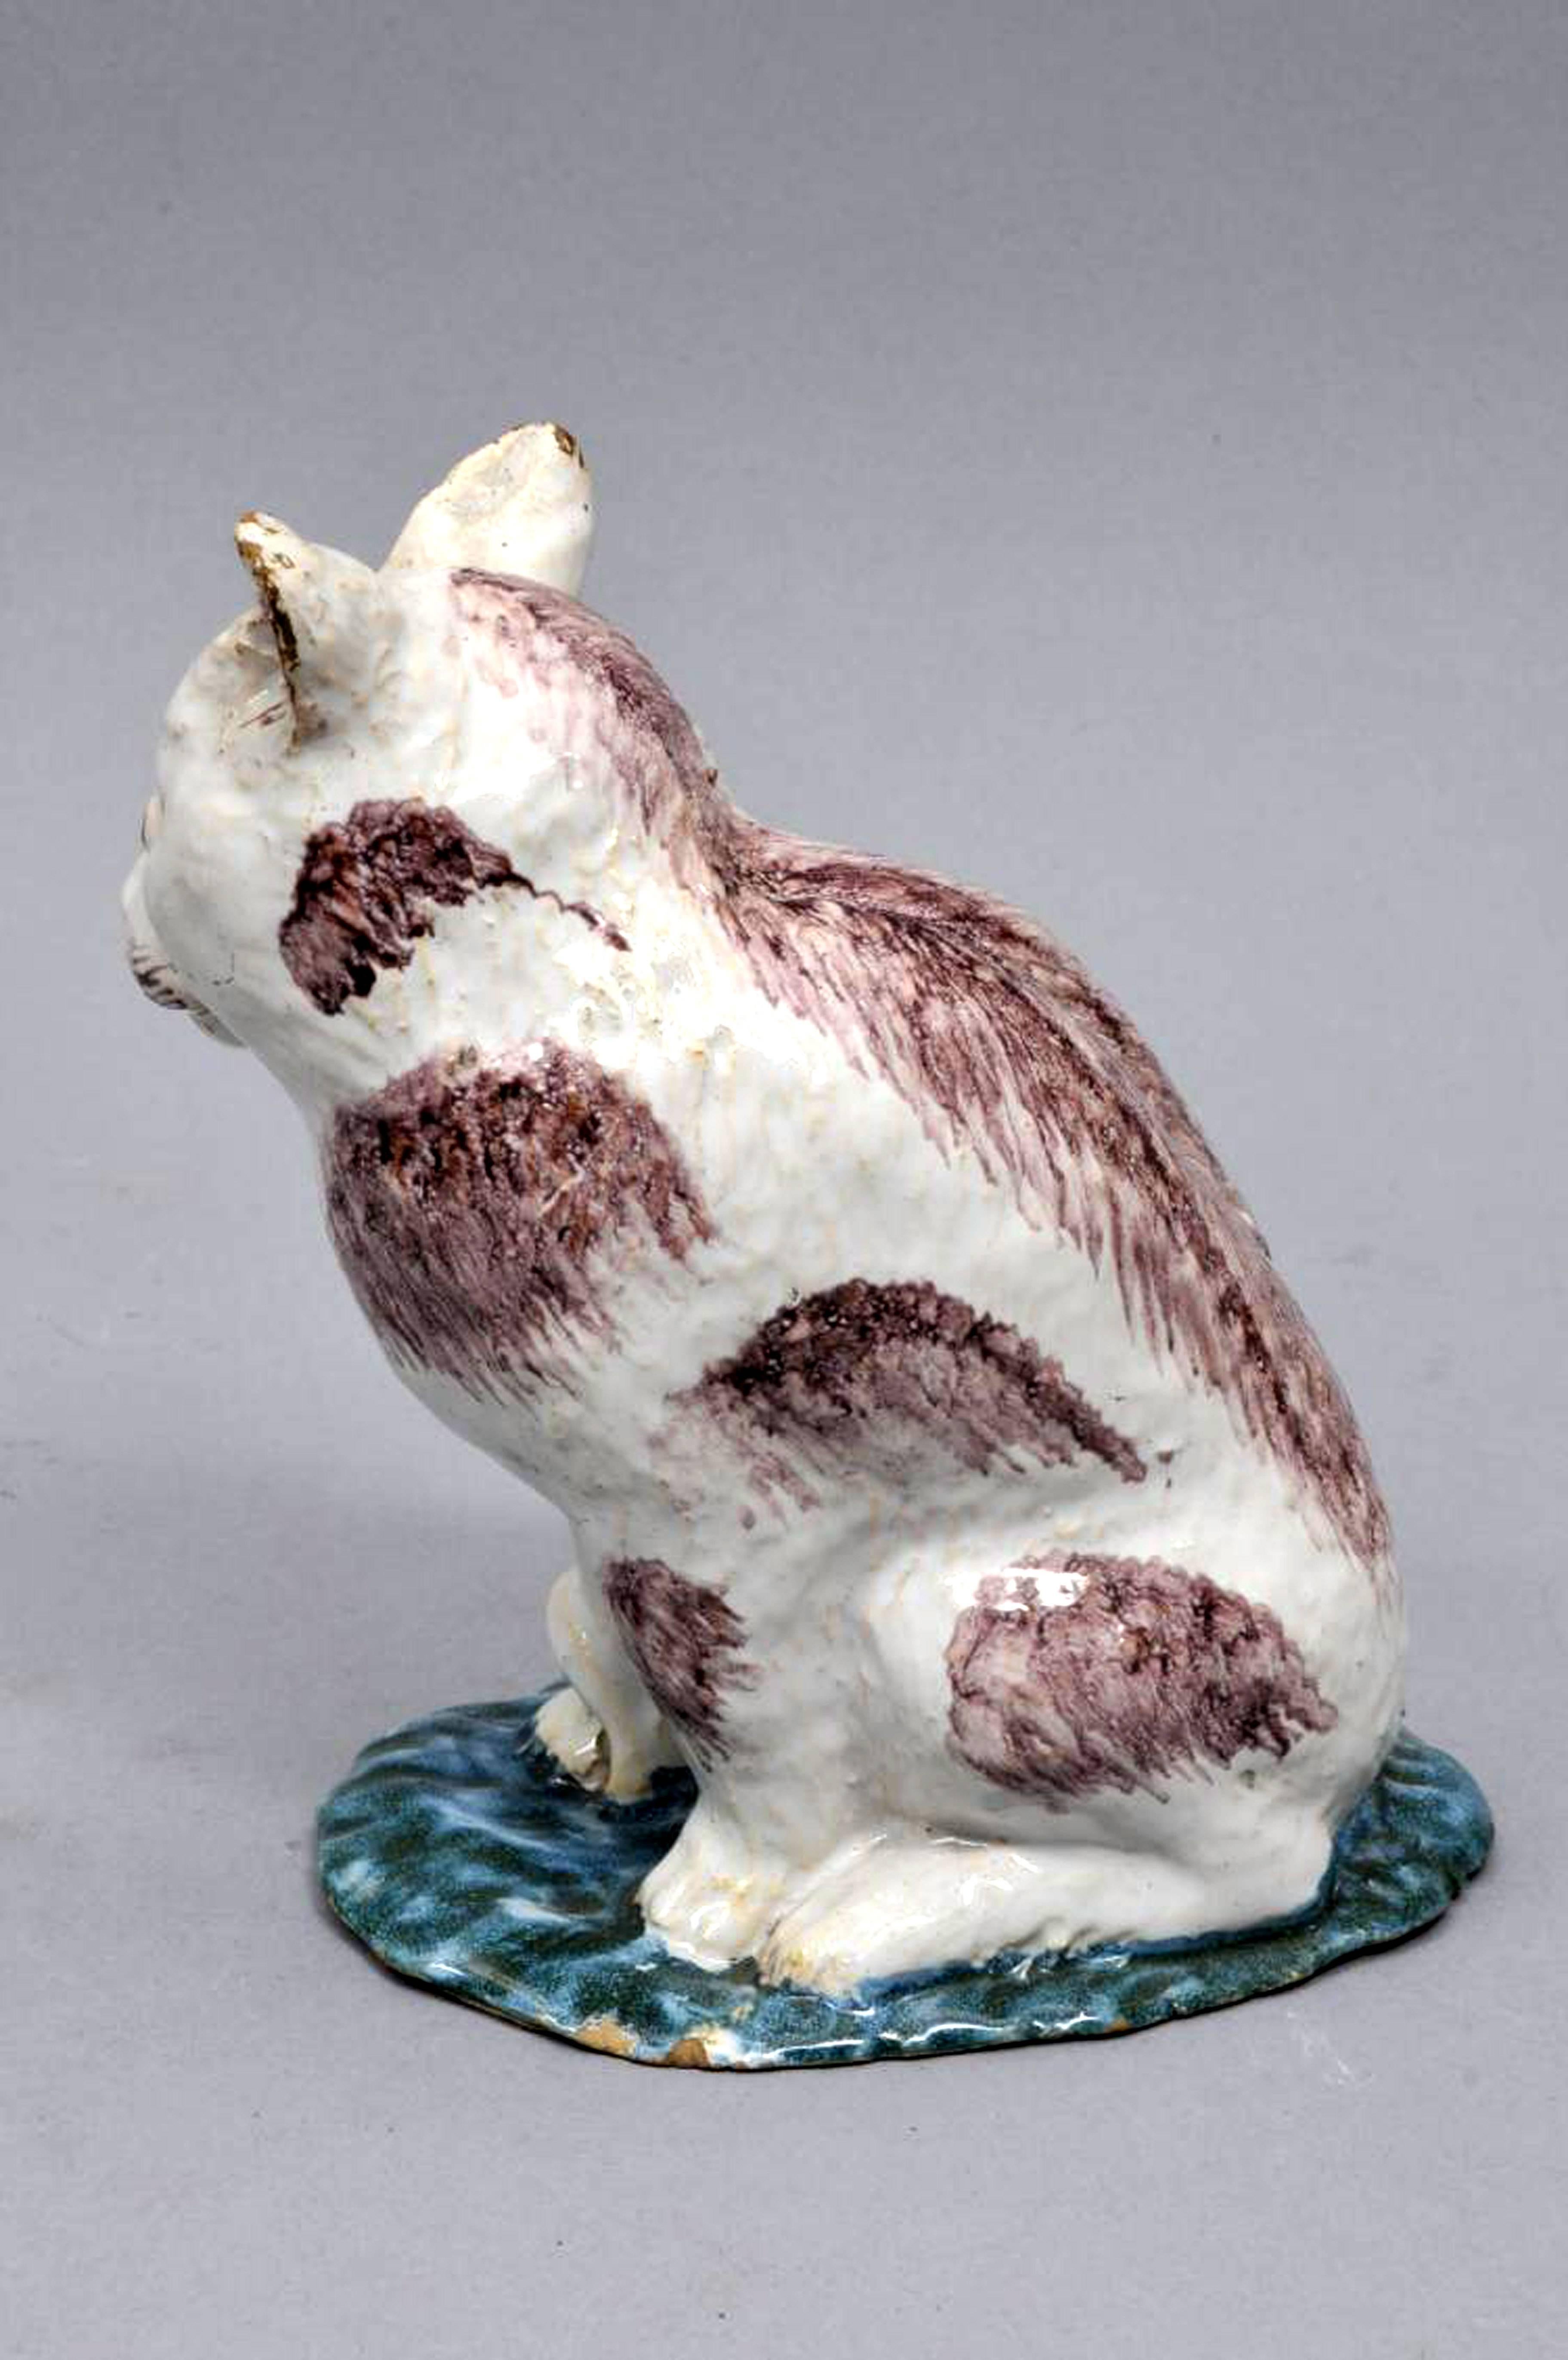 Brussels Faience model of a cat, 
Philippe Mombaers for the Rue de Laeken factory,
circa 1765-1785

The figure of a cat is depicted sitting on its hindquarters with manganese colouration on a green base.

Dimensions: 7 1/2 inches